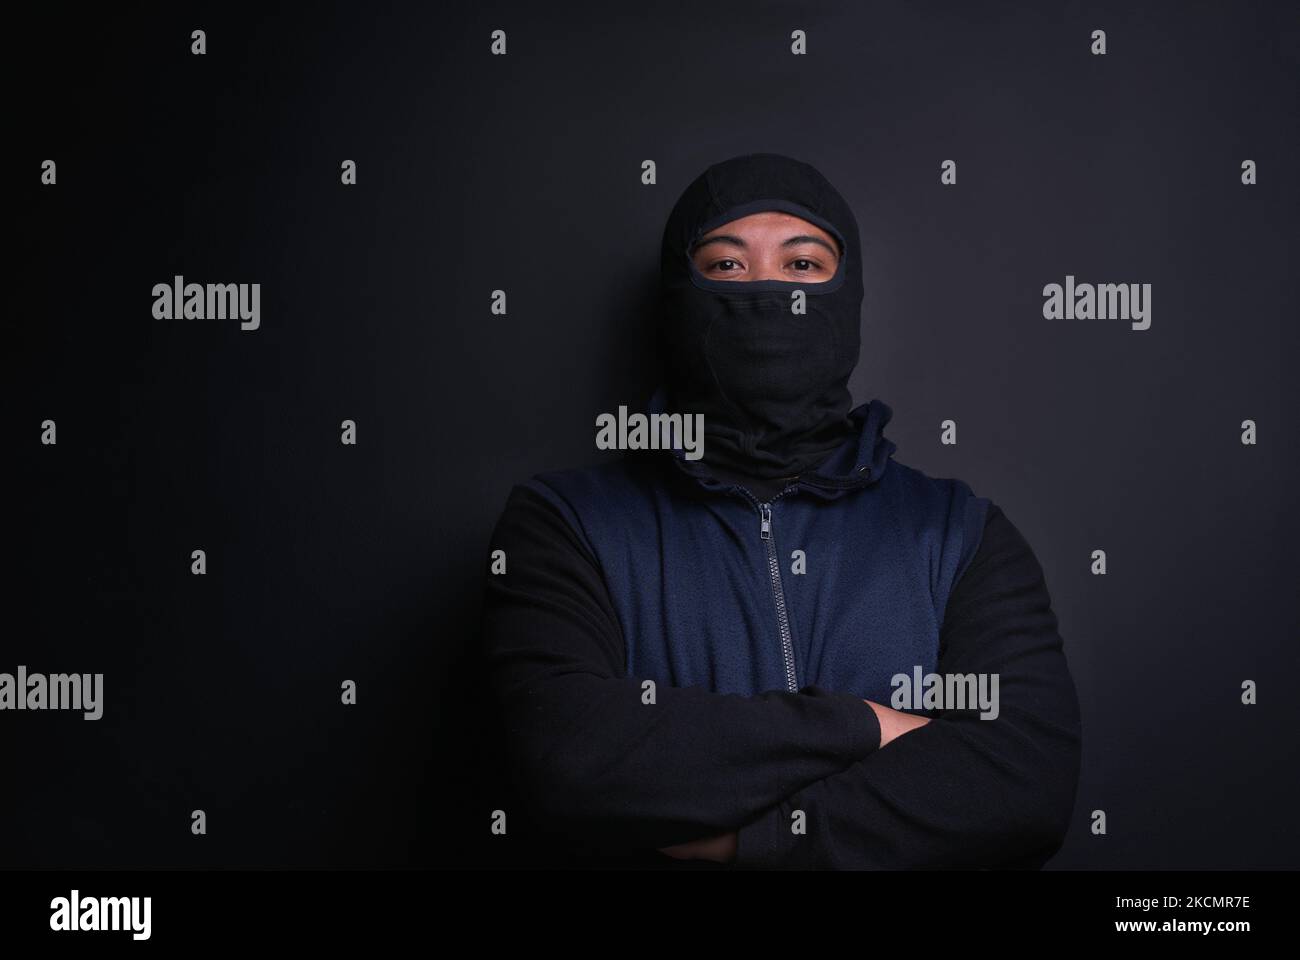 You wont even see me coming. Portrait of a man posing with his arms crossed against a dark background. Stock Photo